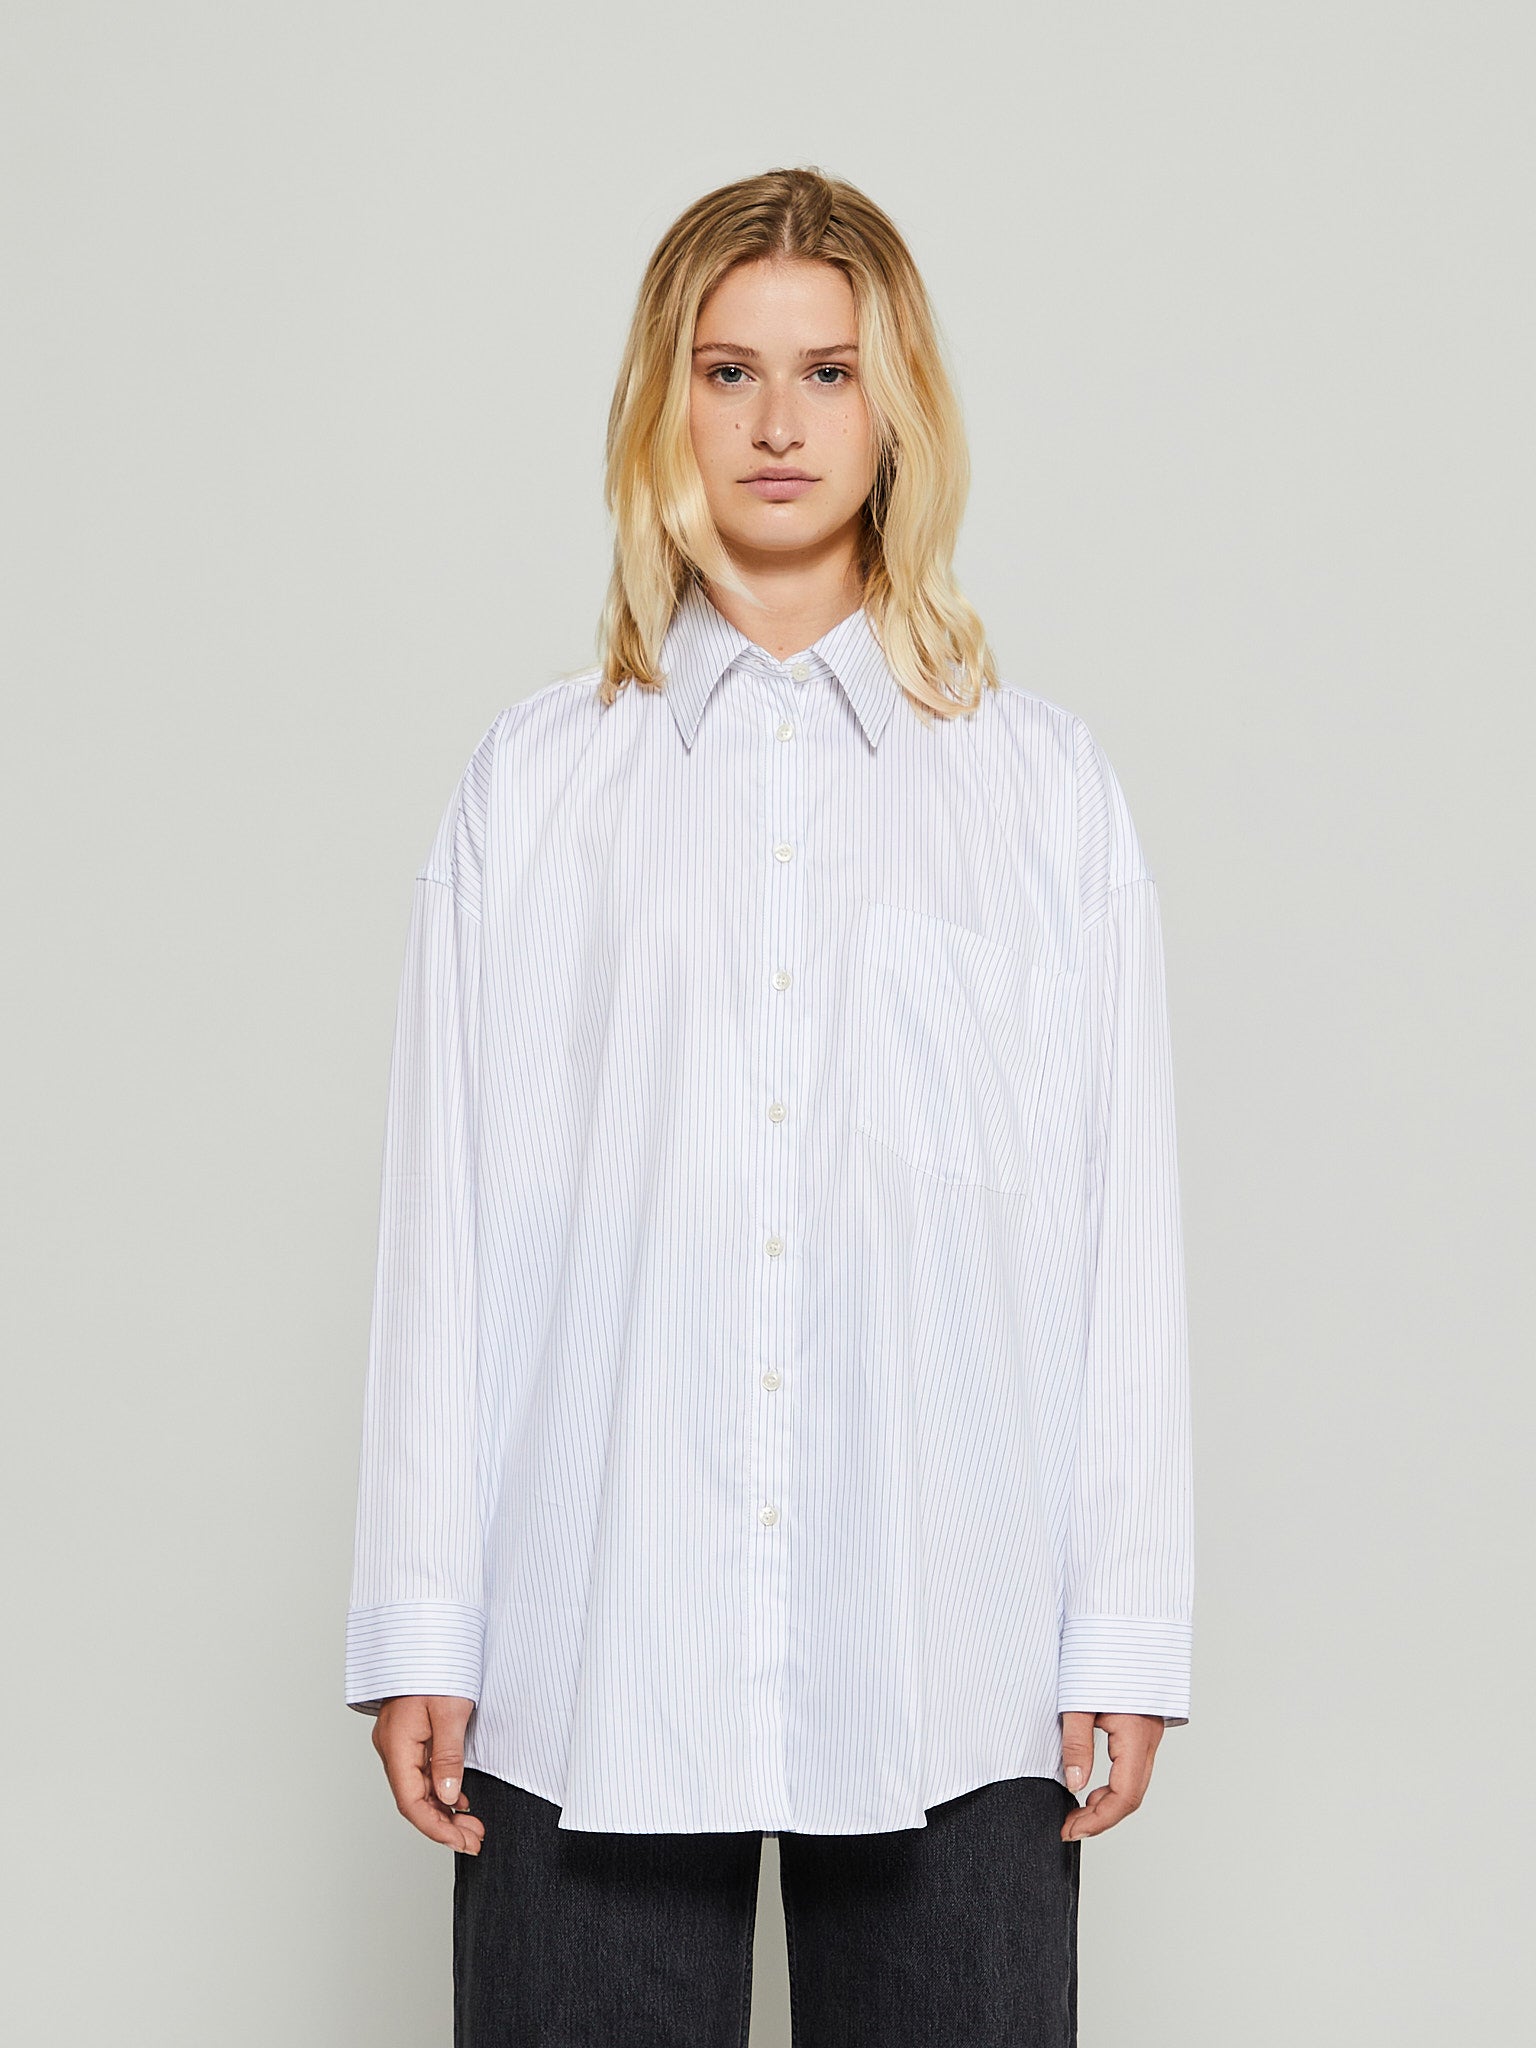 Acne Studios - Striped Button-Up Shirt in White and Blue